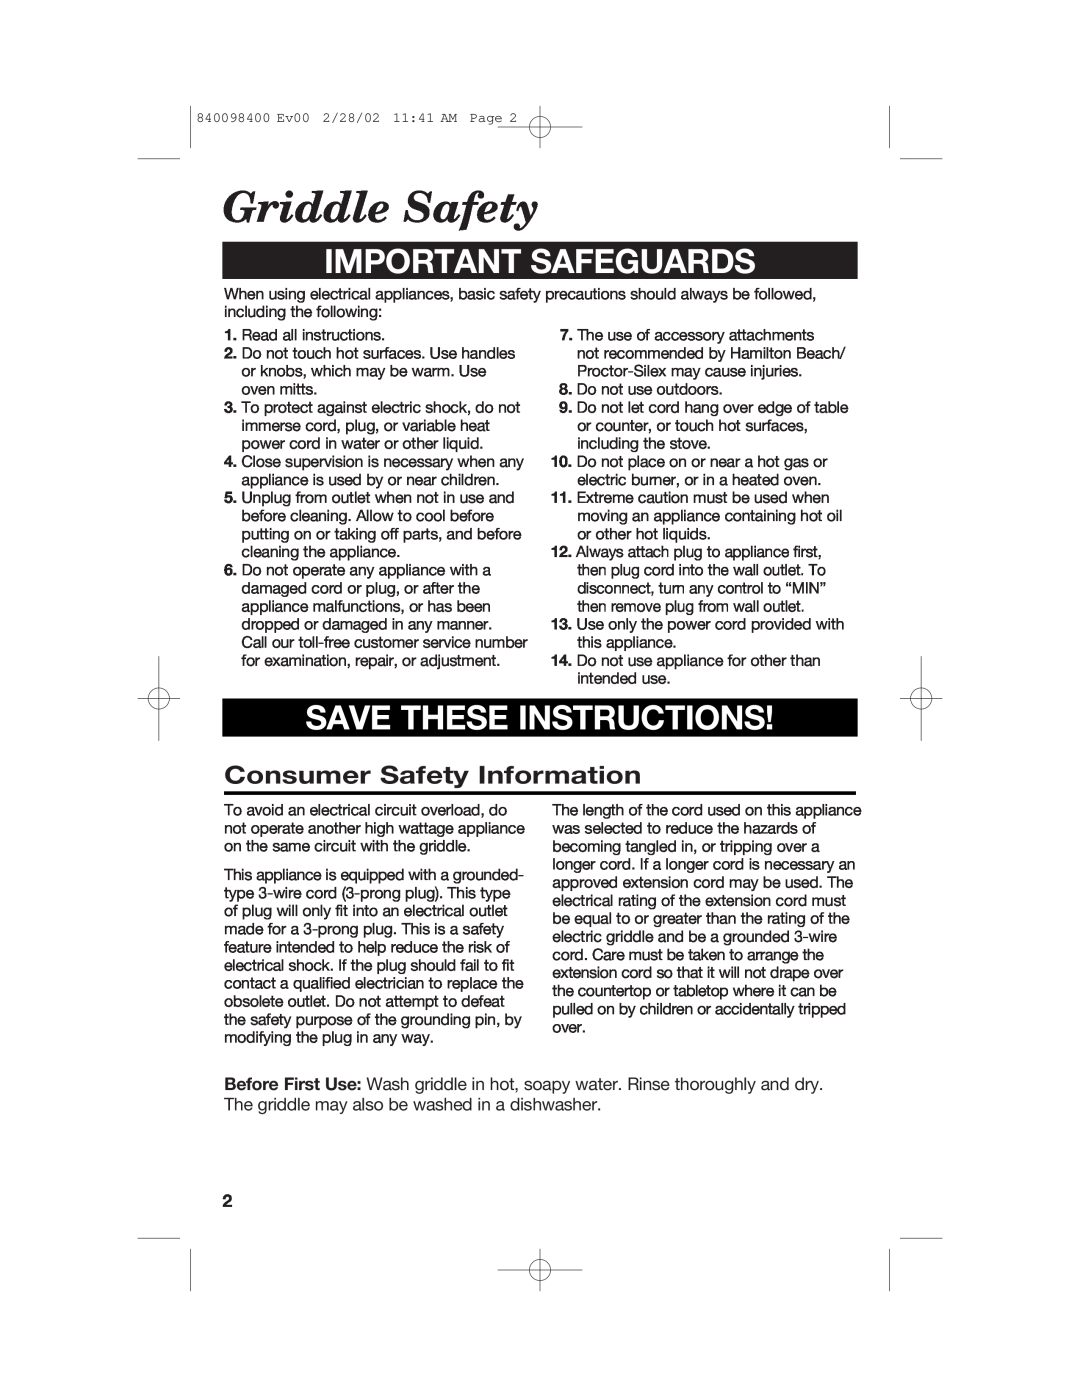 Hamilton Beach Electric Griddle Griddle Safety, Important Safeguards, Save These Instructions, Consumer Safety Information 